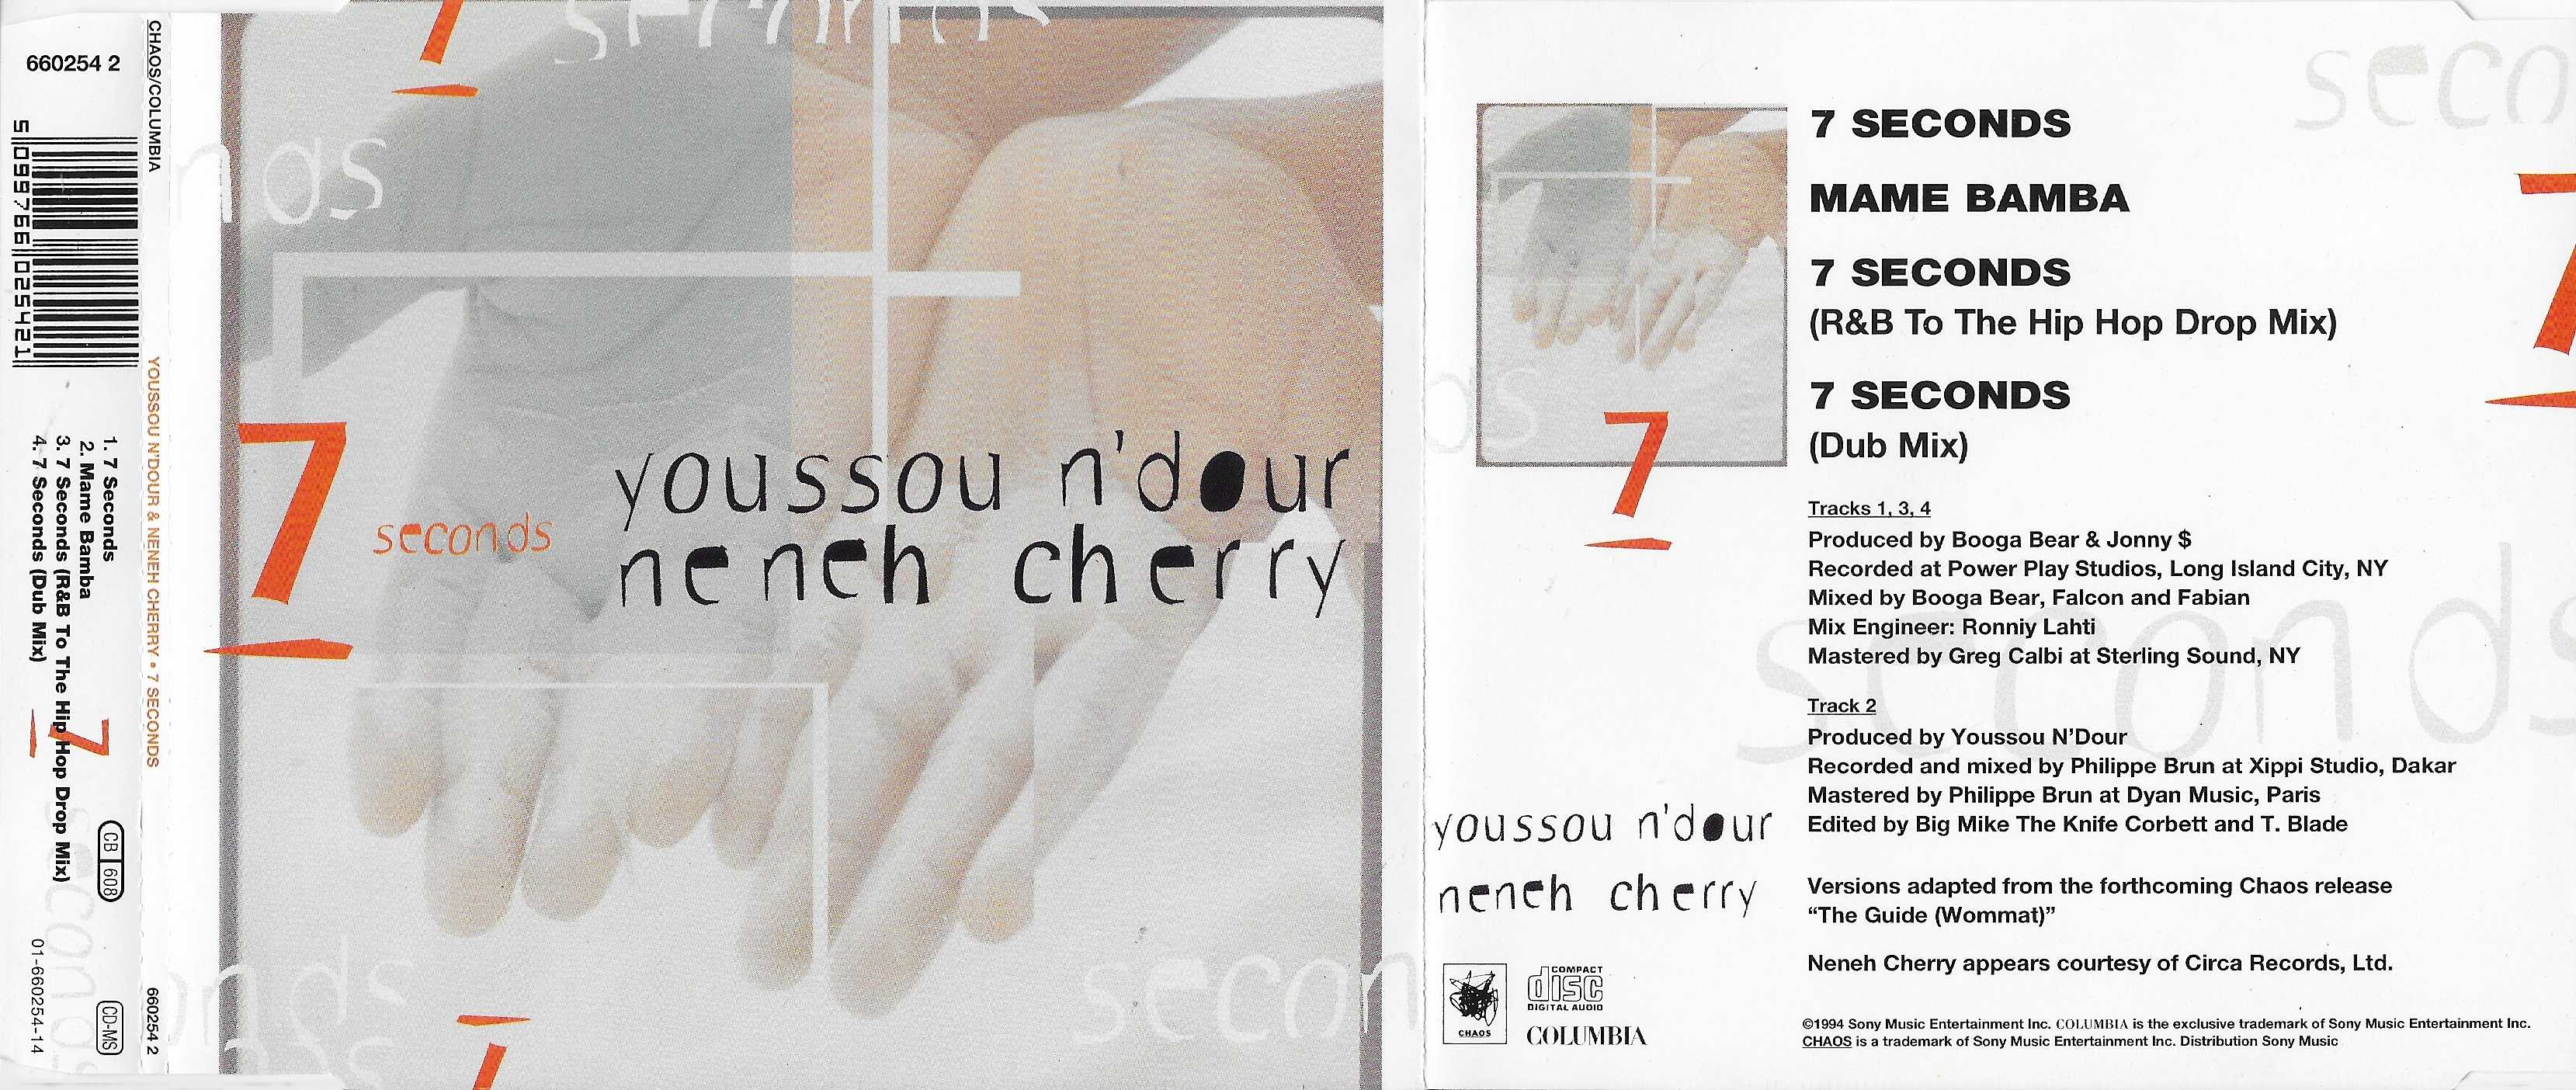 Picture of 660254 2 7 seconds by artist Youssou D'Dour / Neneh Cherry 